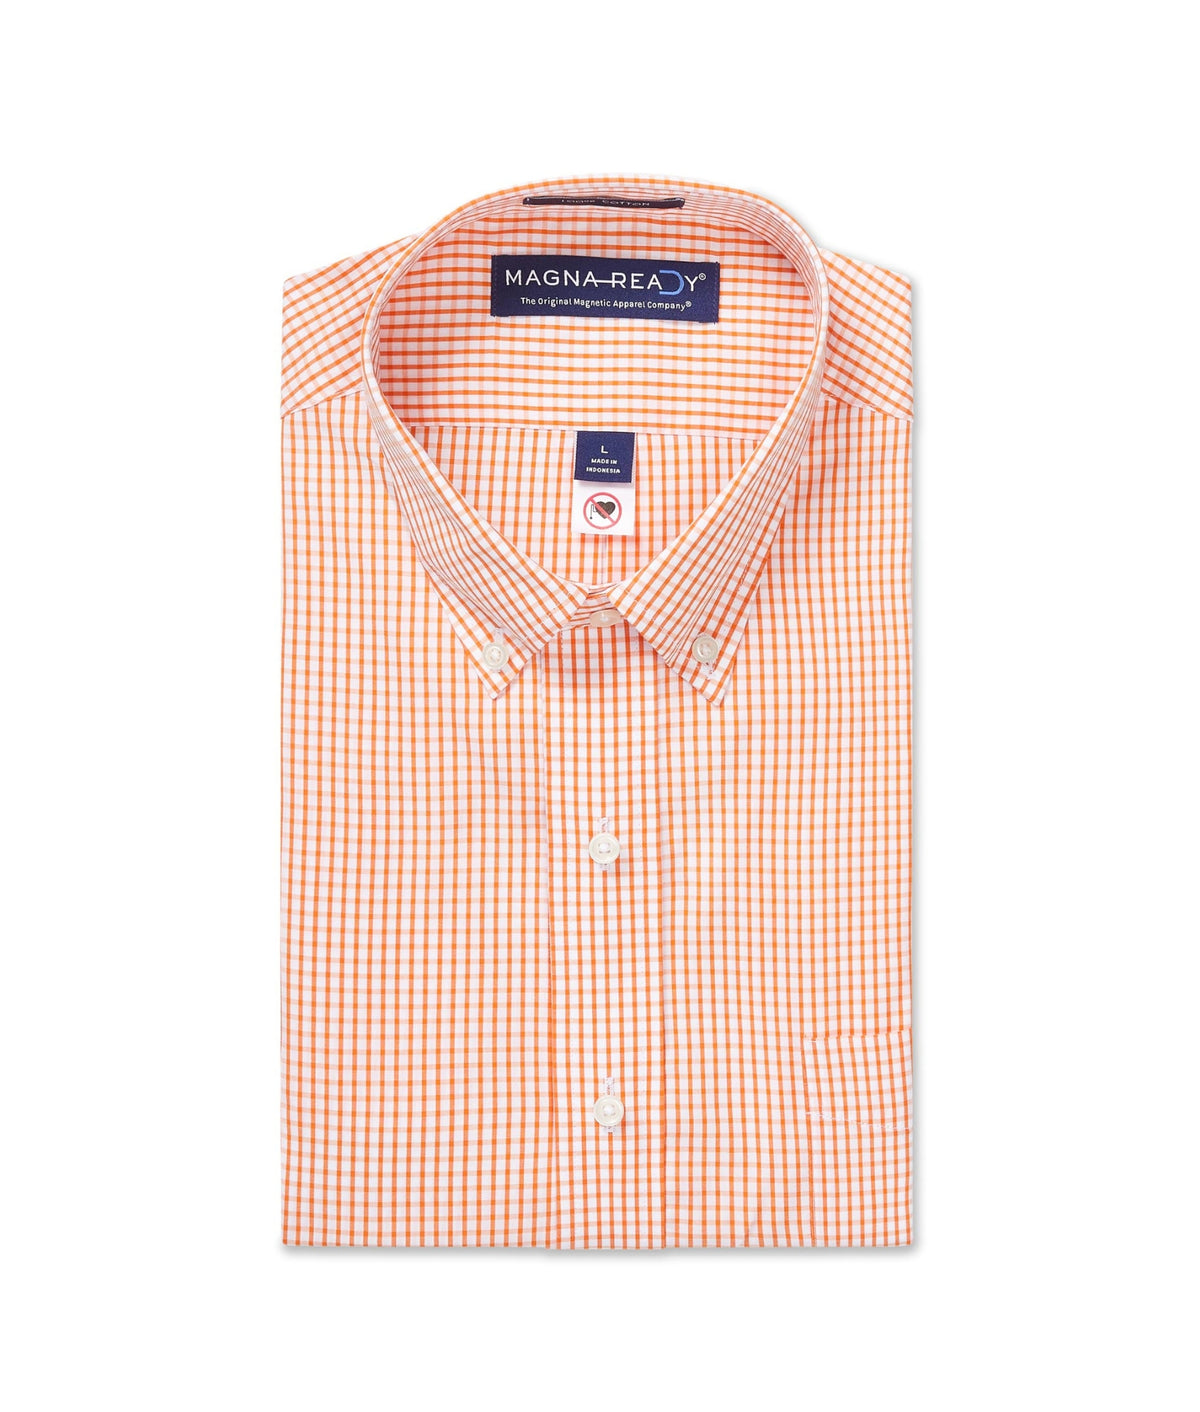 Long Sleeve Orange and White Classic Button Down Collar Check Shirt with Magnetic Closures